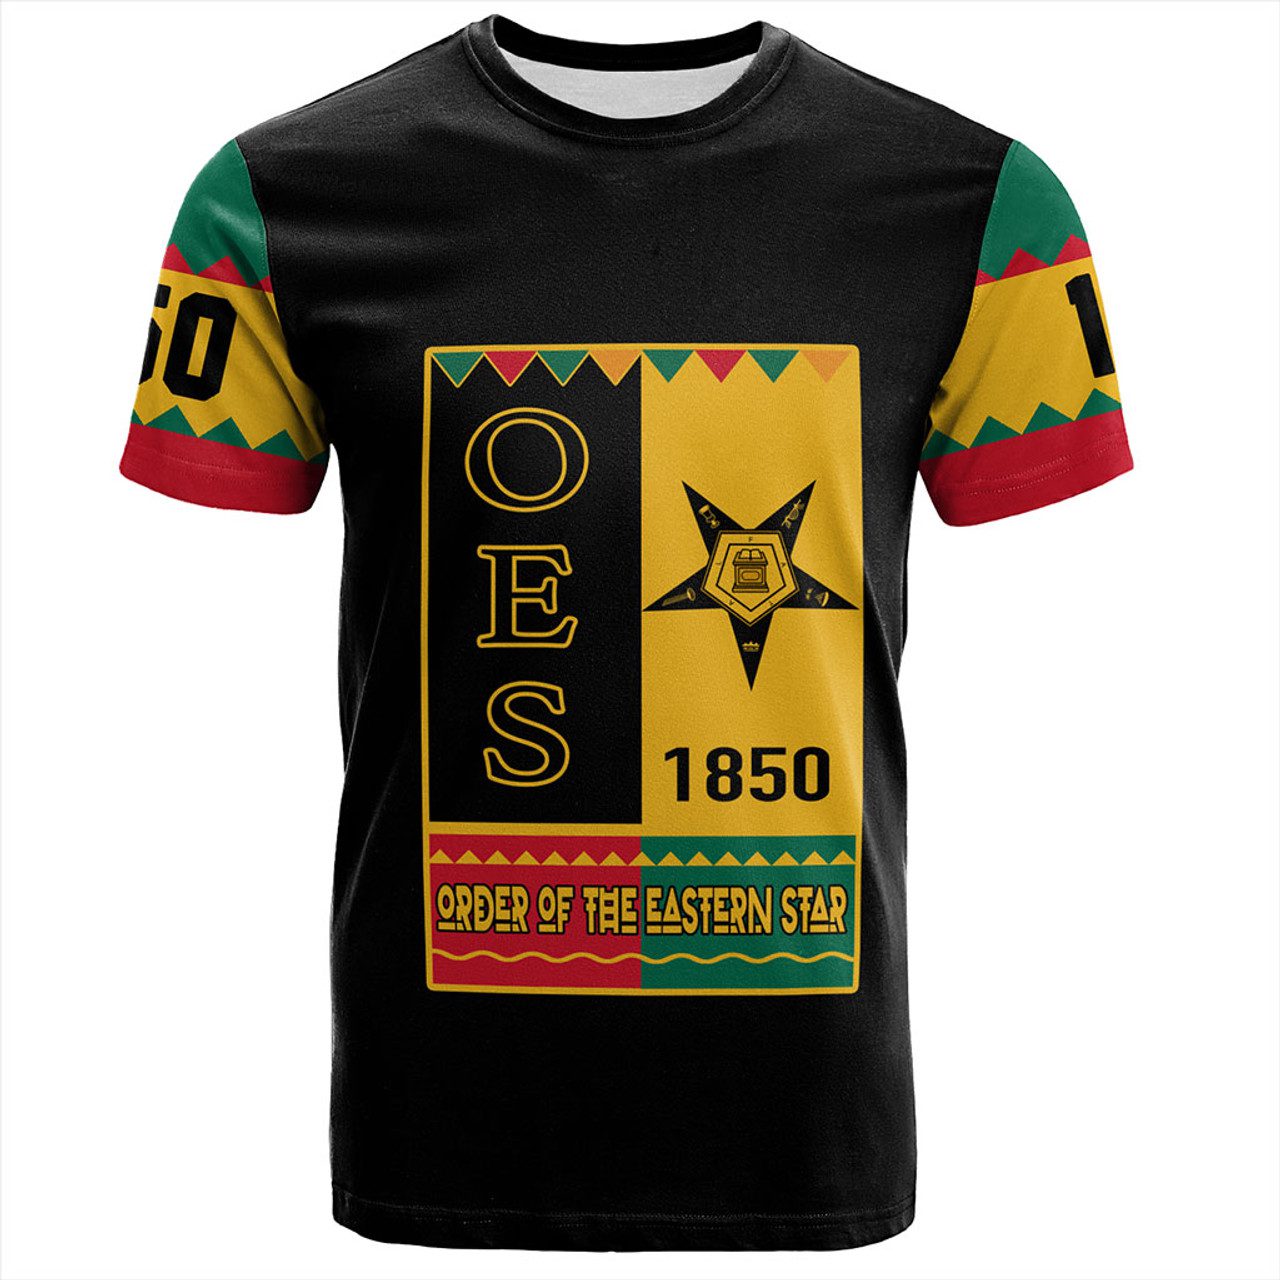 Order of the Eastern Star T-Shirt Black History Month